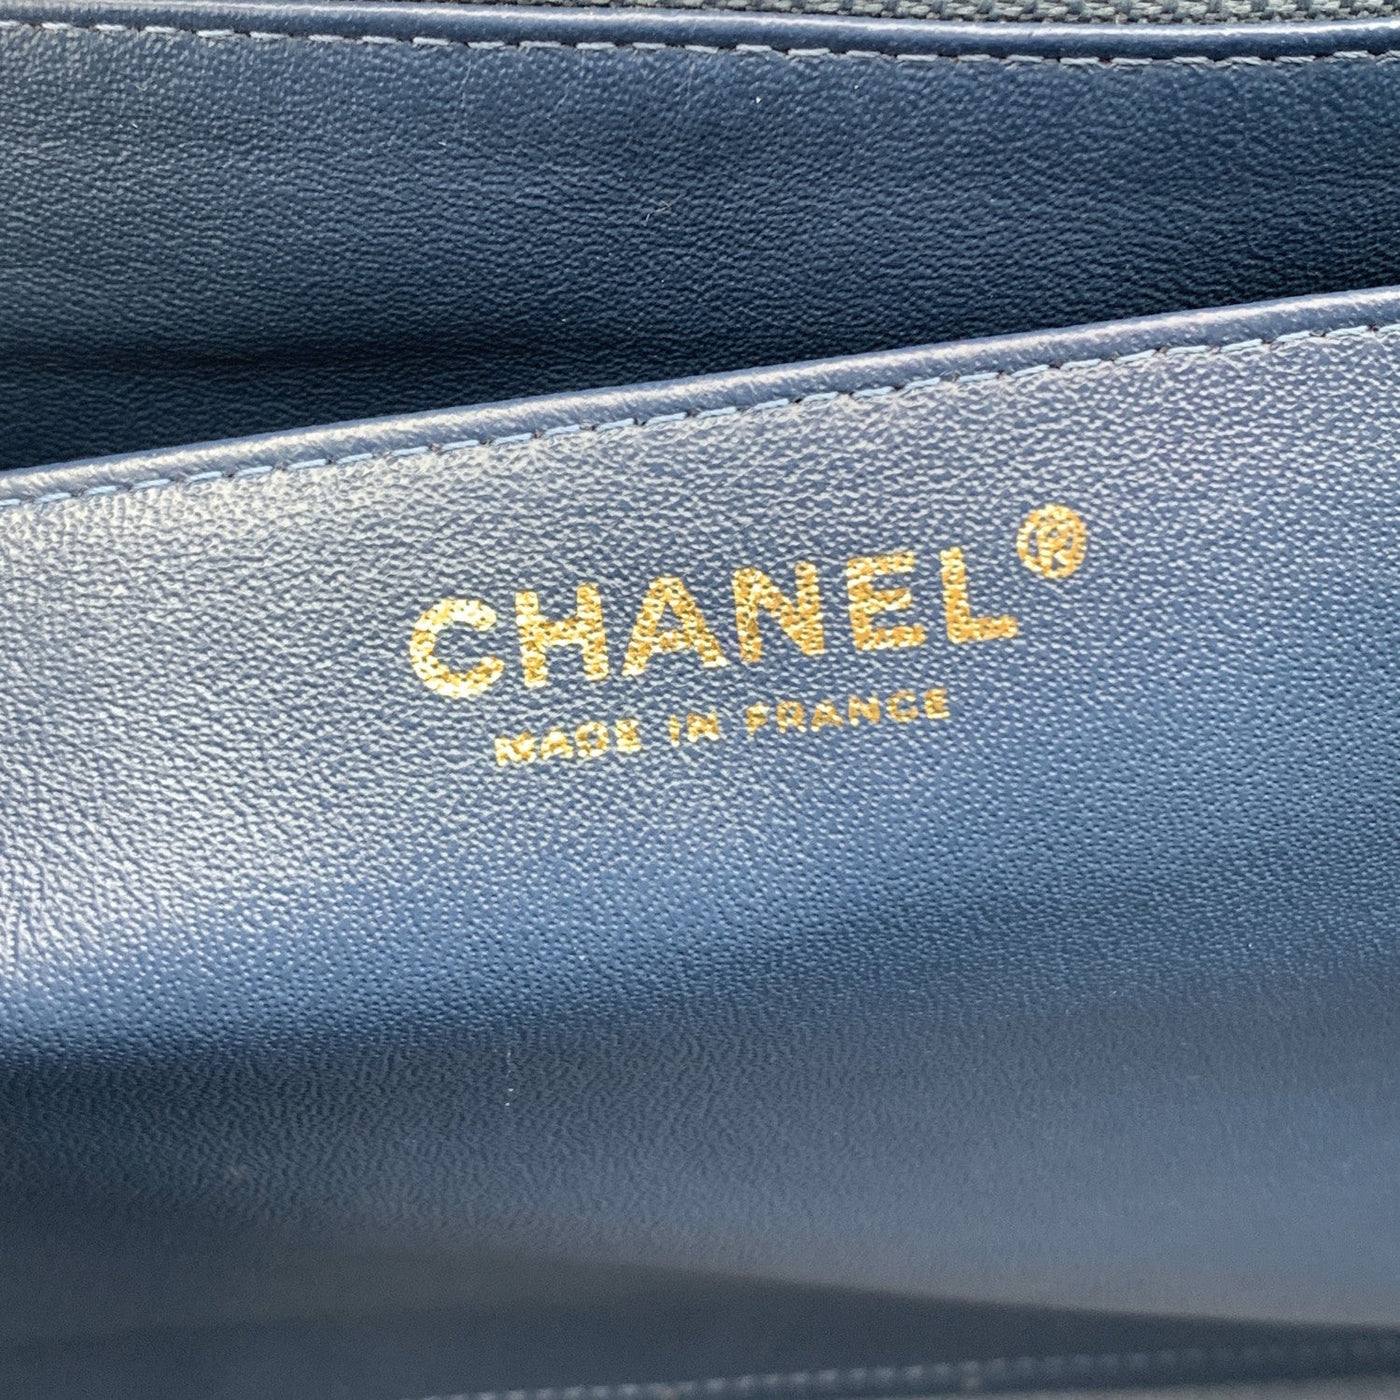 CHANEL - Classic 08 Single Flap Bag - Blue Quilted Lambskin Maxi